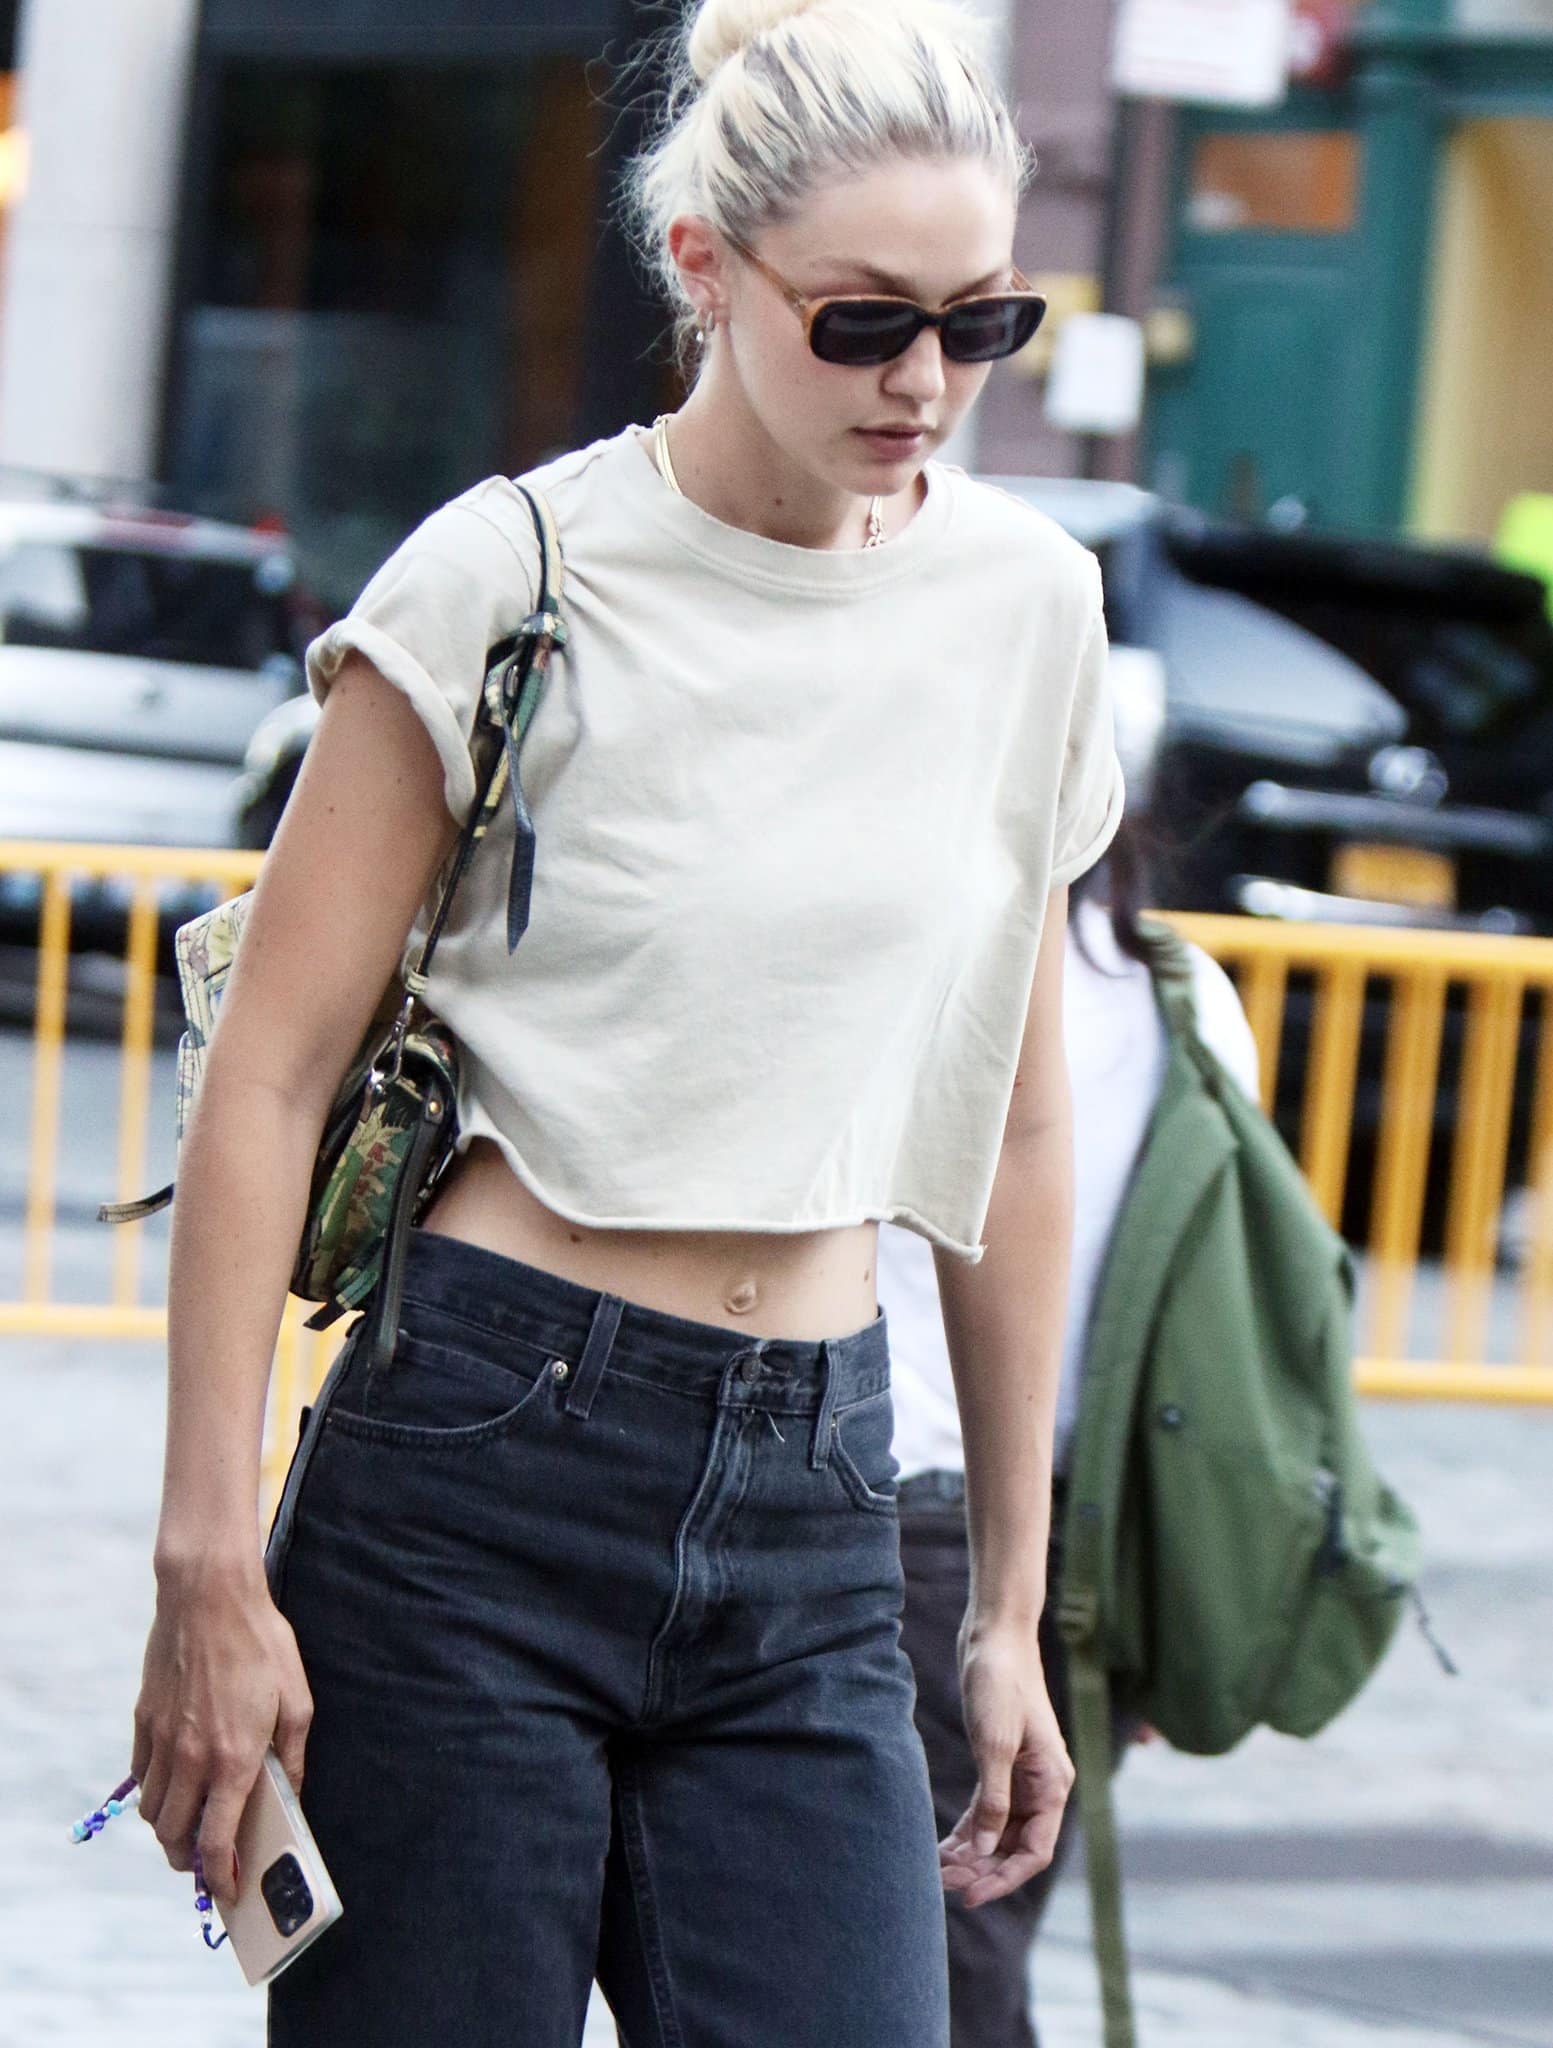 Gigi Hadid wears her hair in a casual bun and hides her eyes behind a pair of rectangular sunglasses